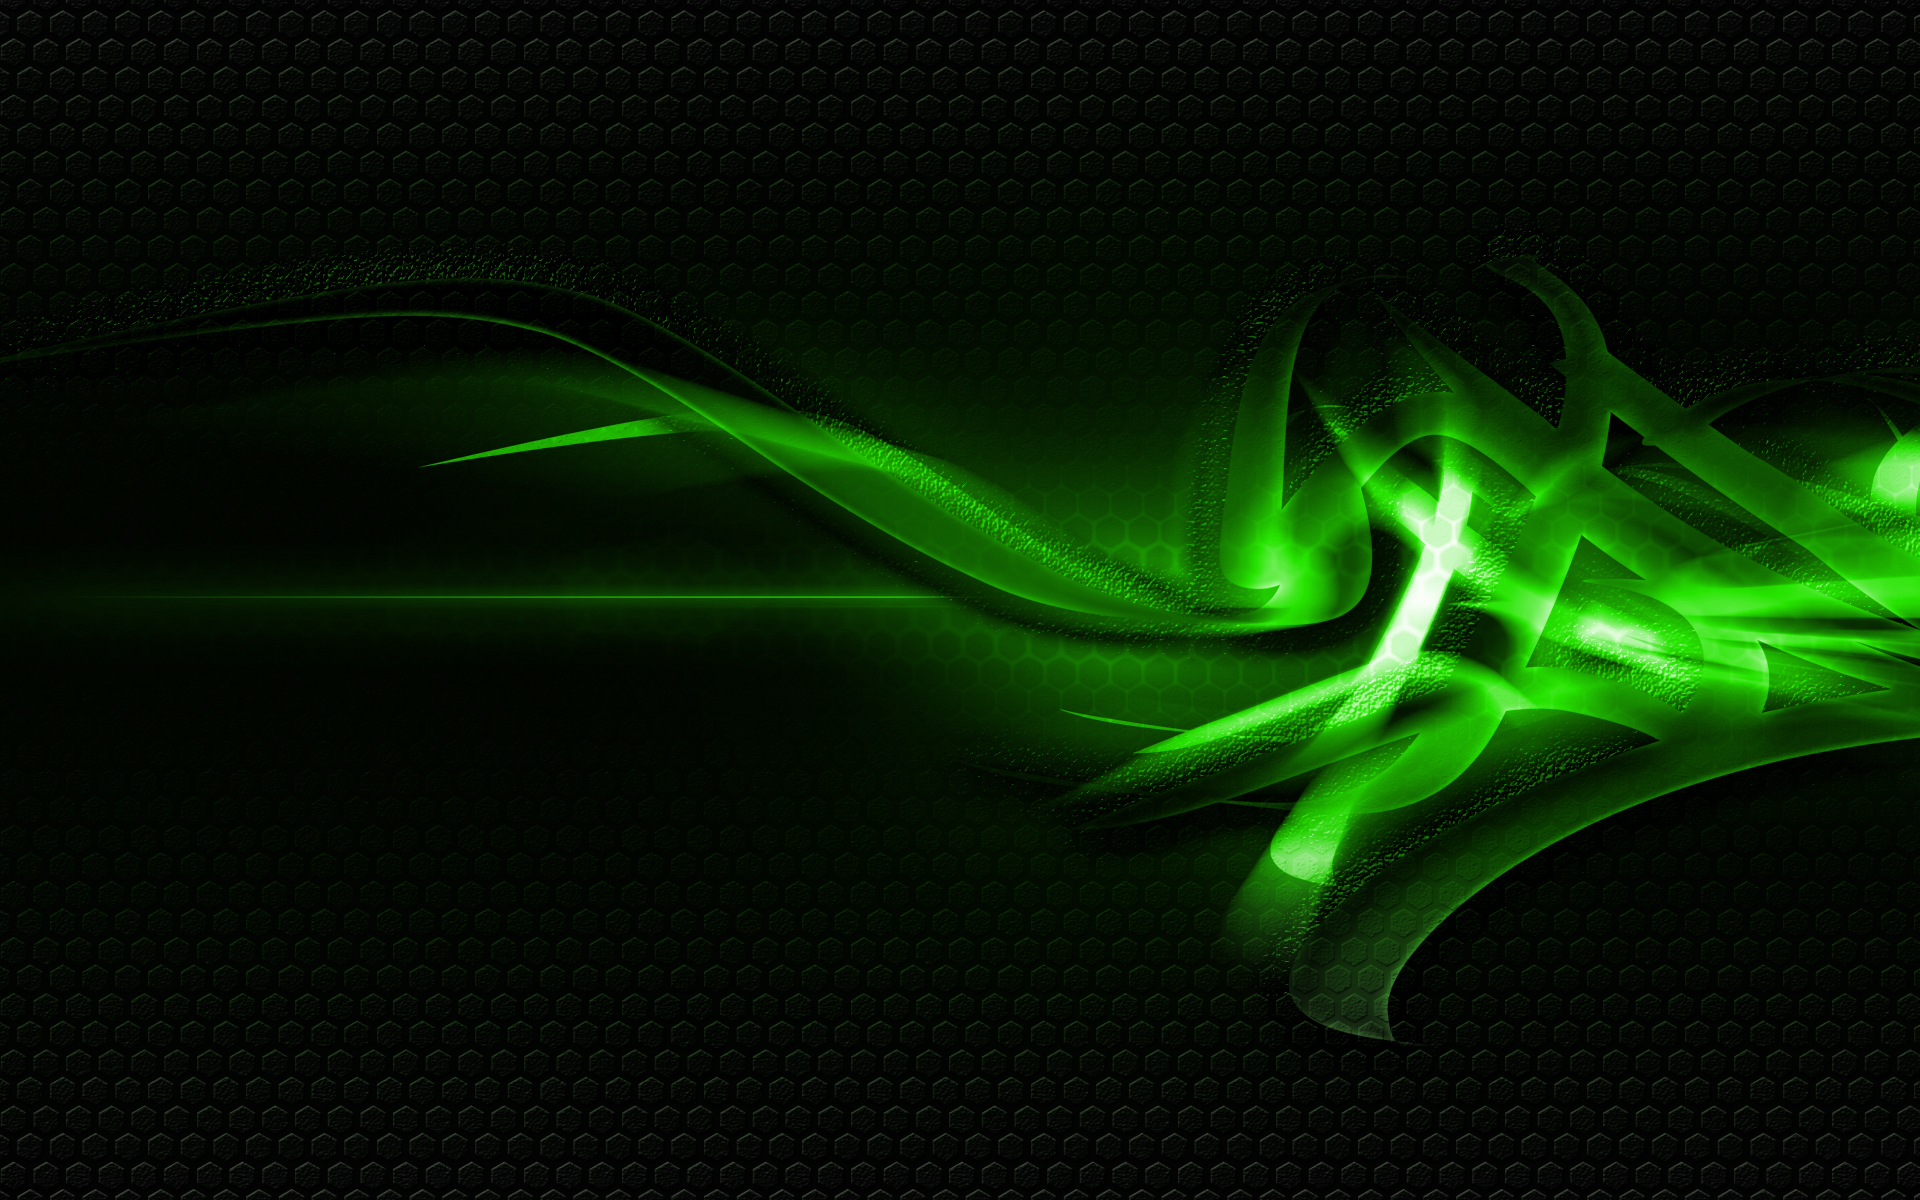 2012 Abstract Wallpapers All images are copyrighted by their